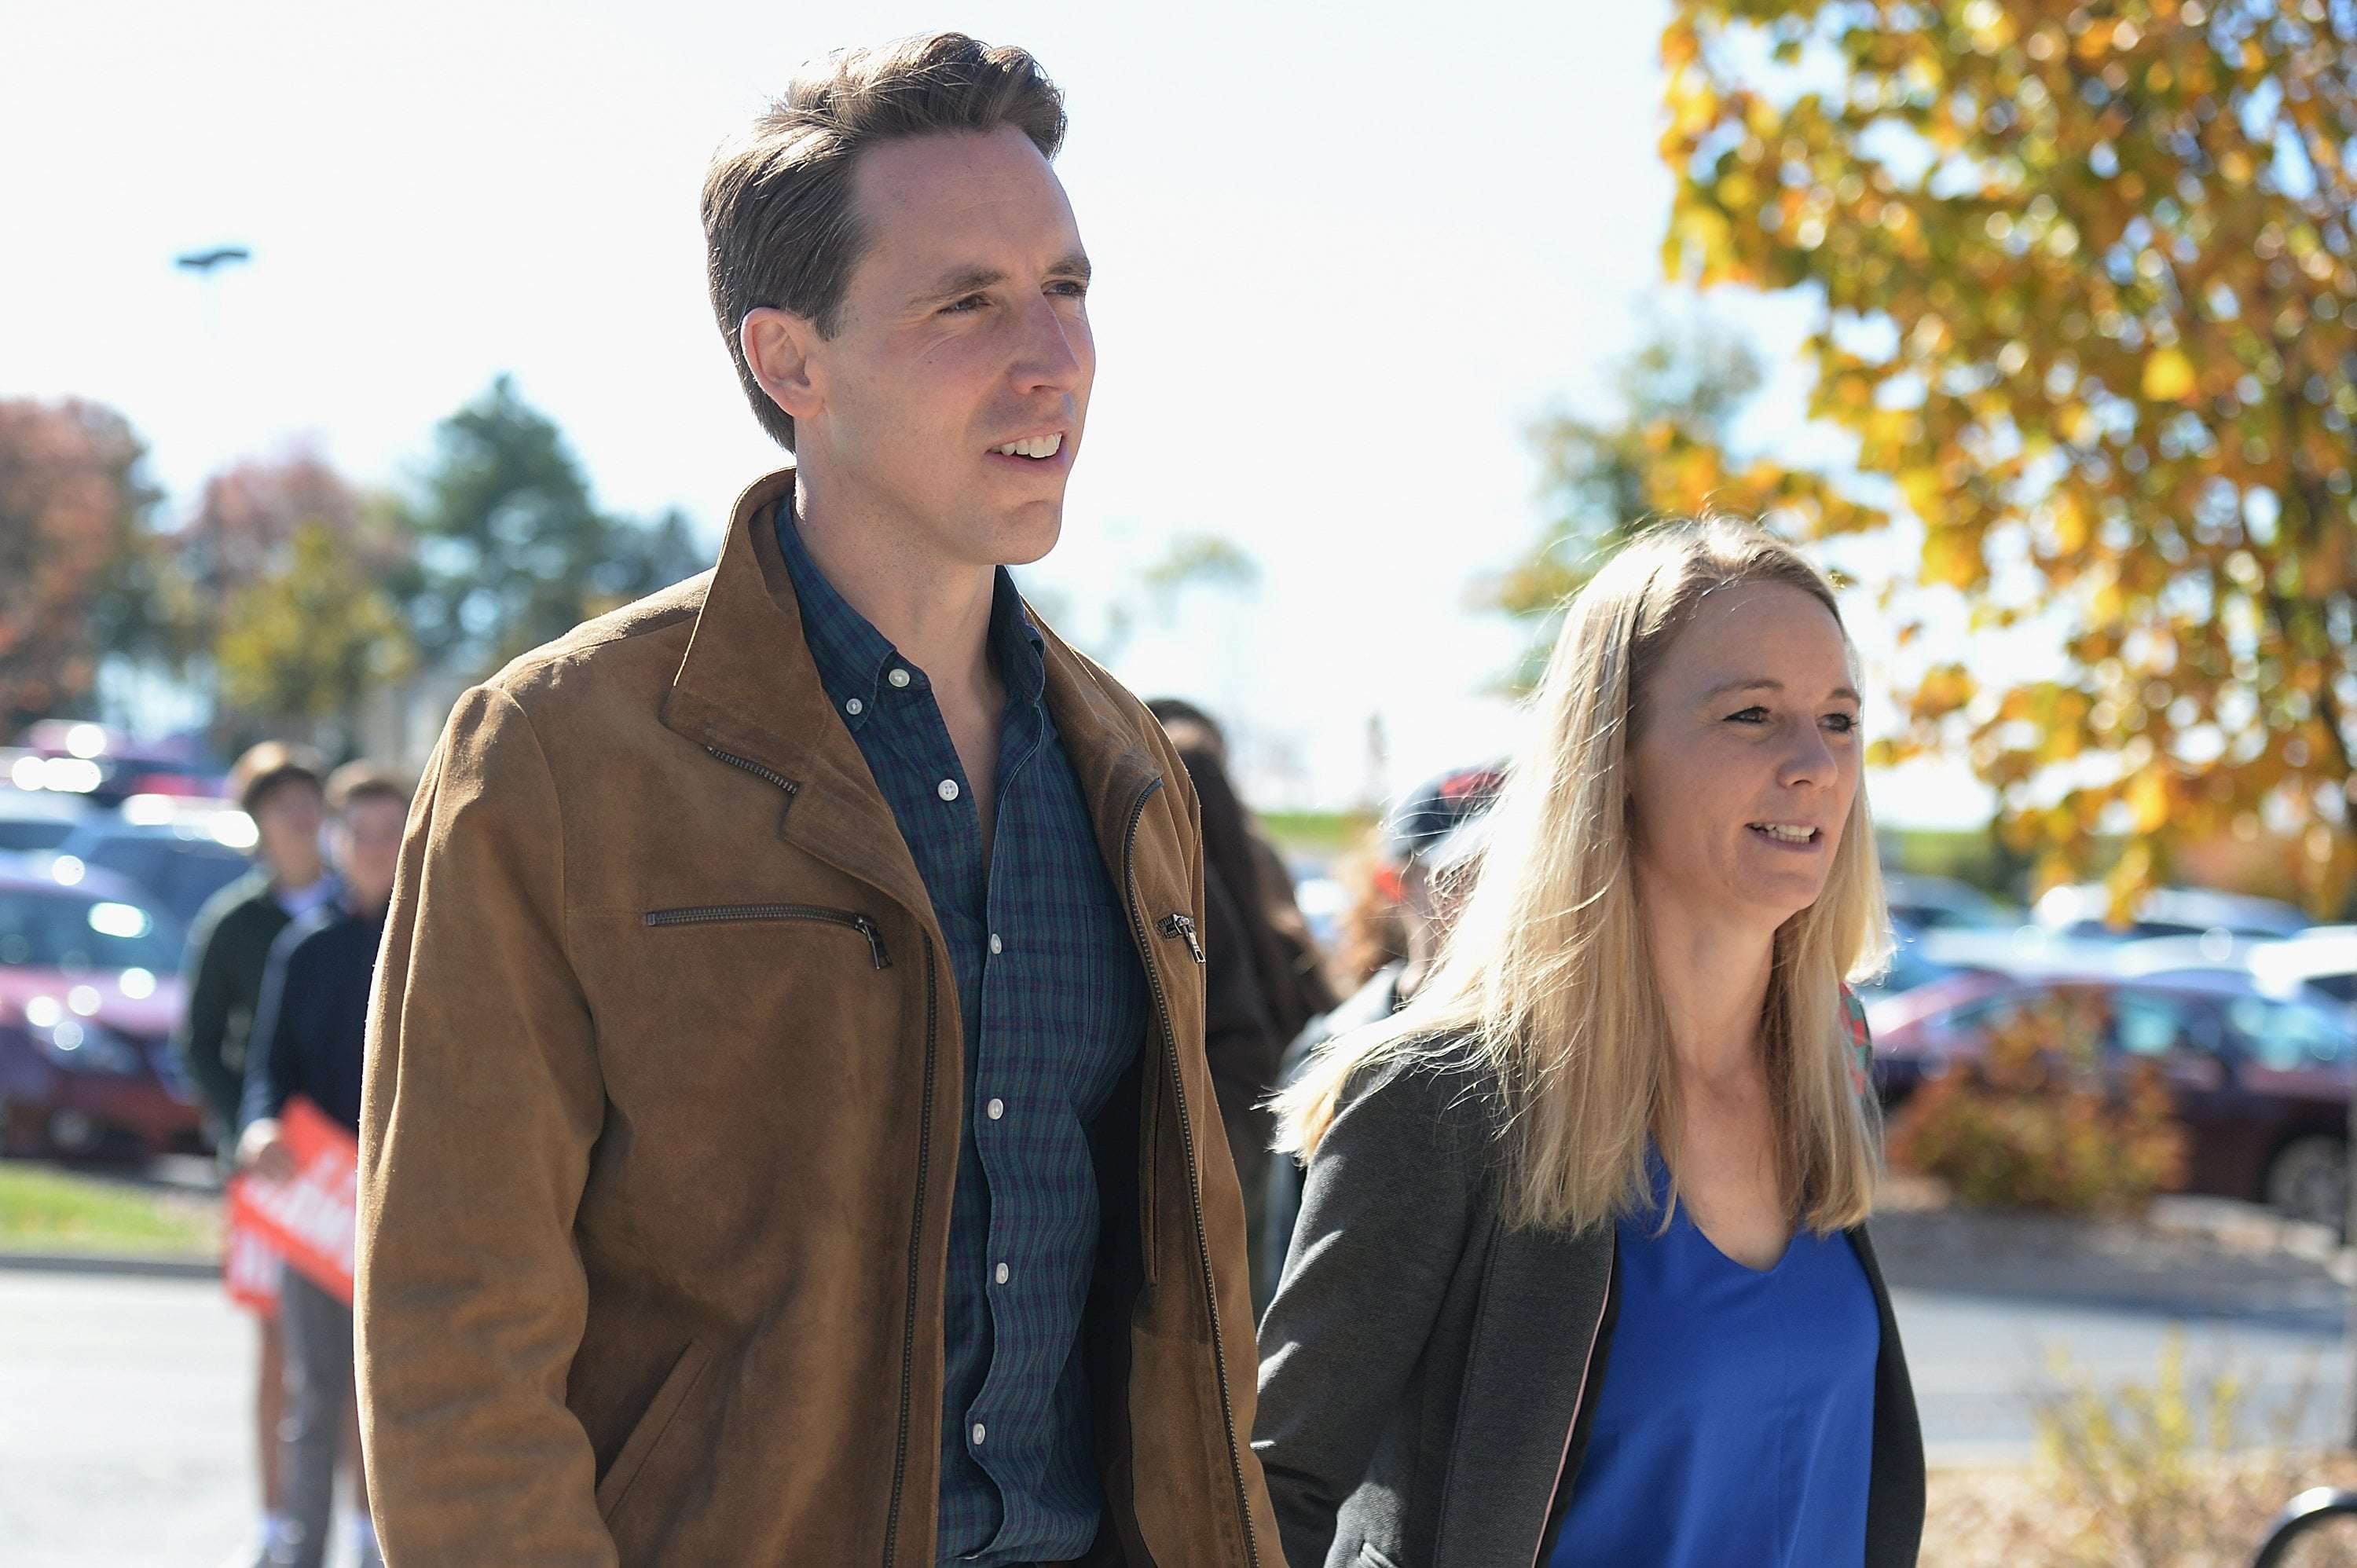 image for Josh Hawley's Wife Faces Calls to Be Sanctioned Over Supreme Court Case